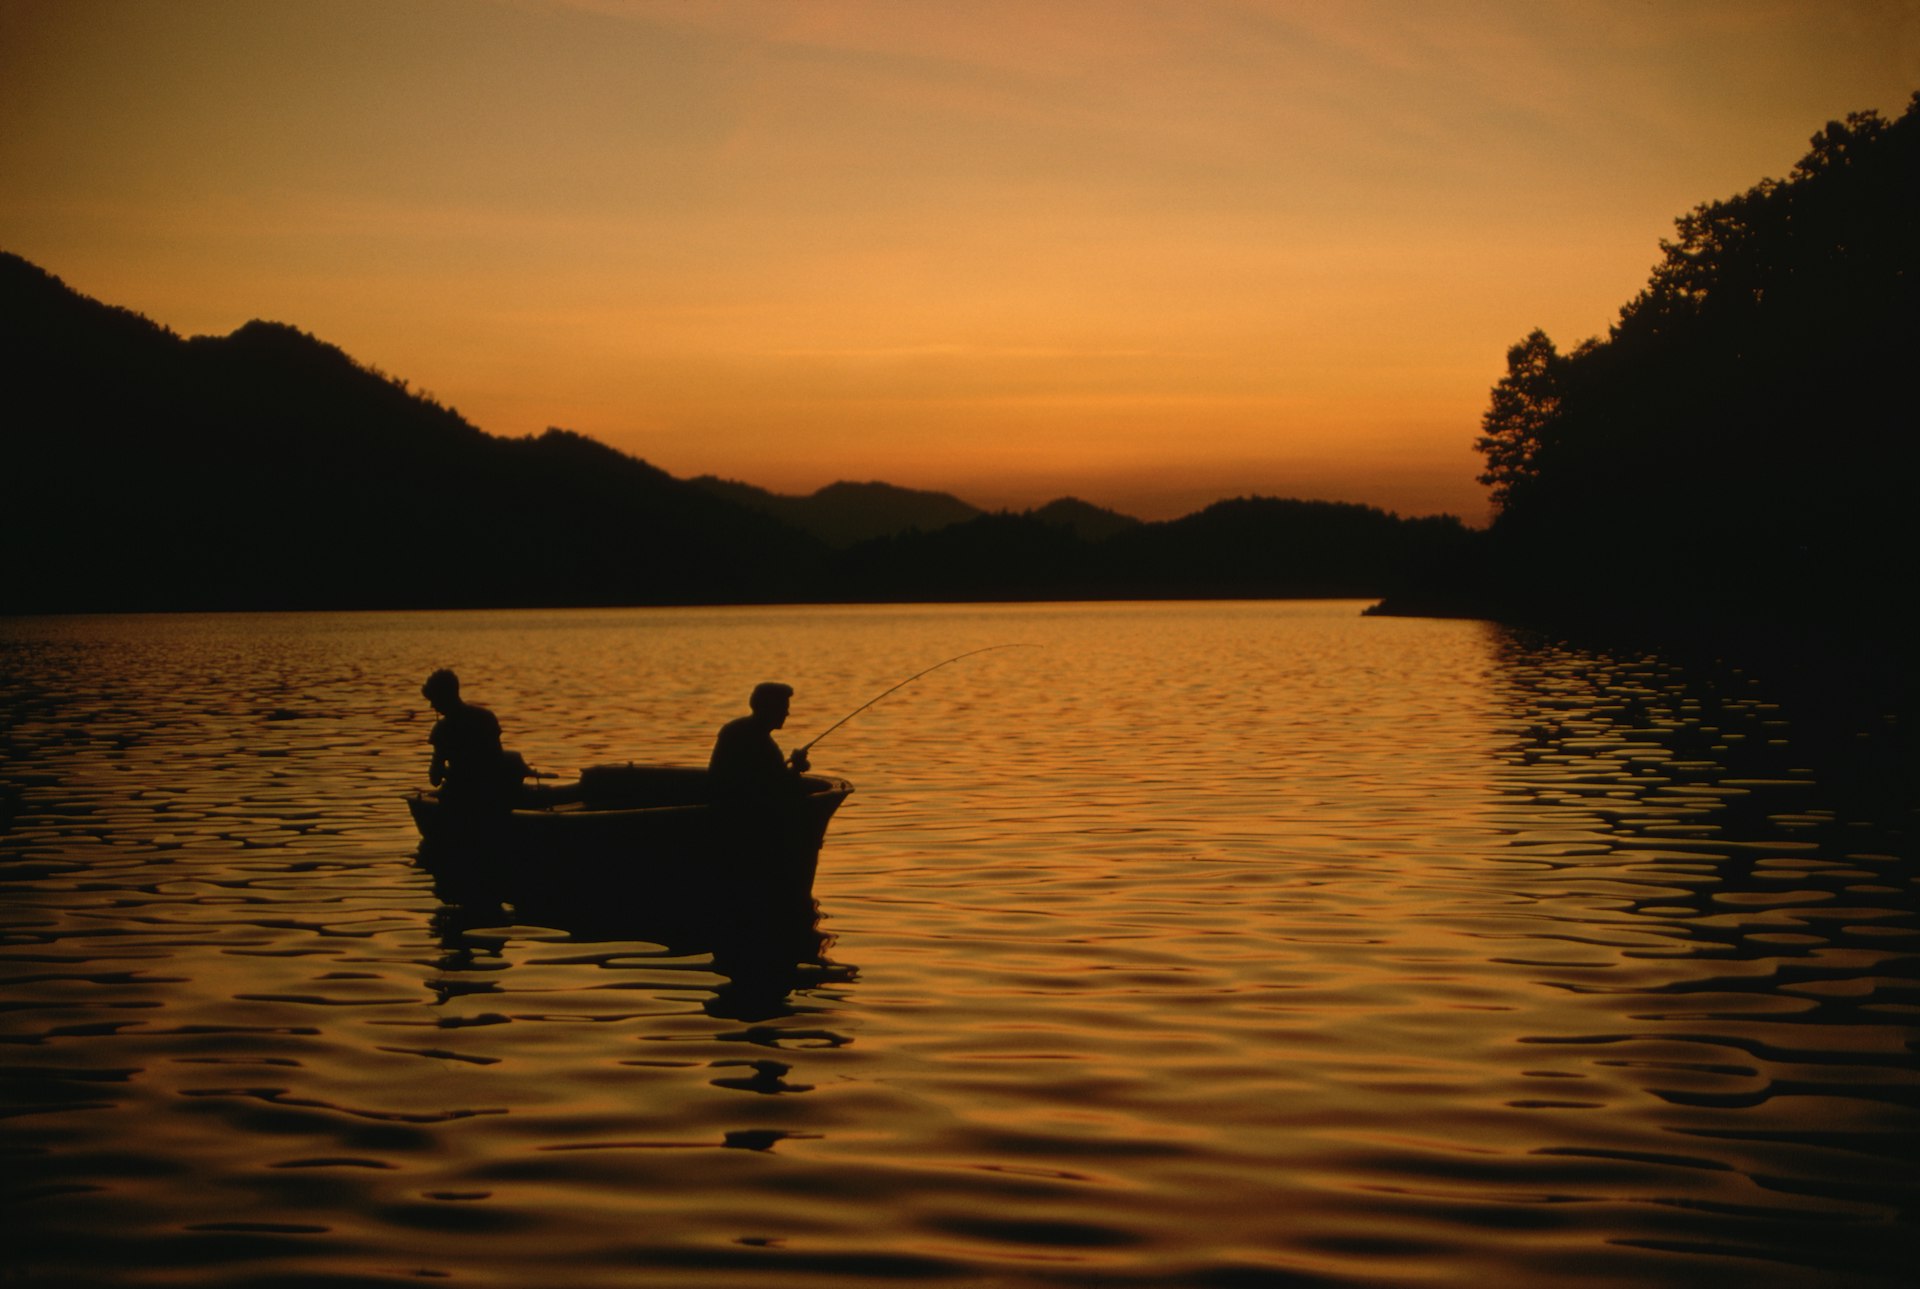 Two people in a small boat fish in a lake under an orange sunset